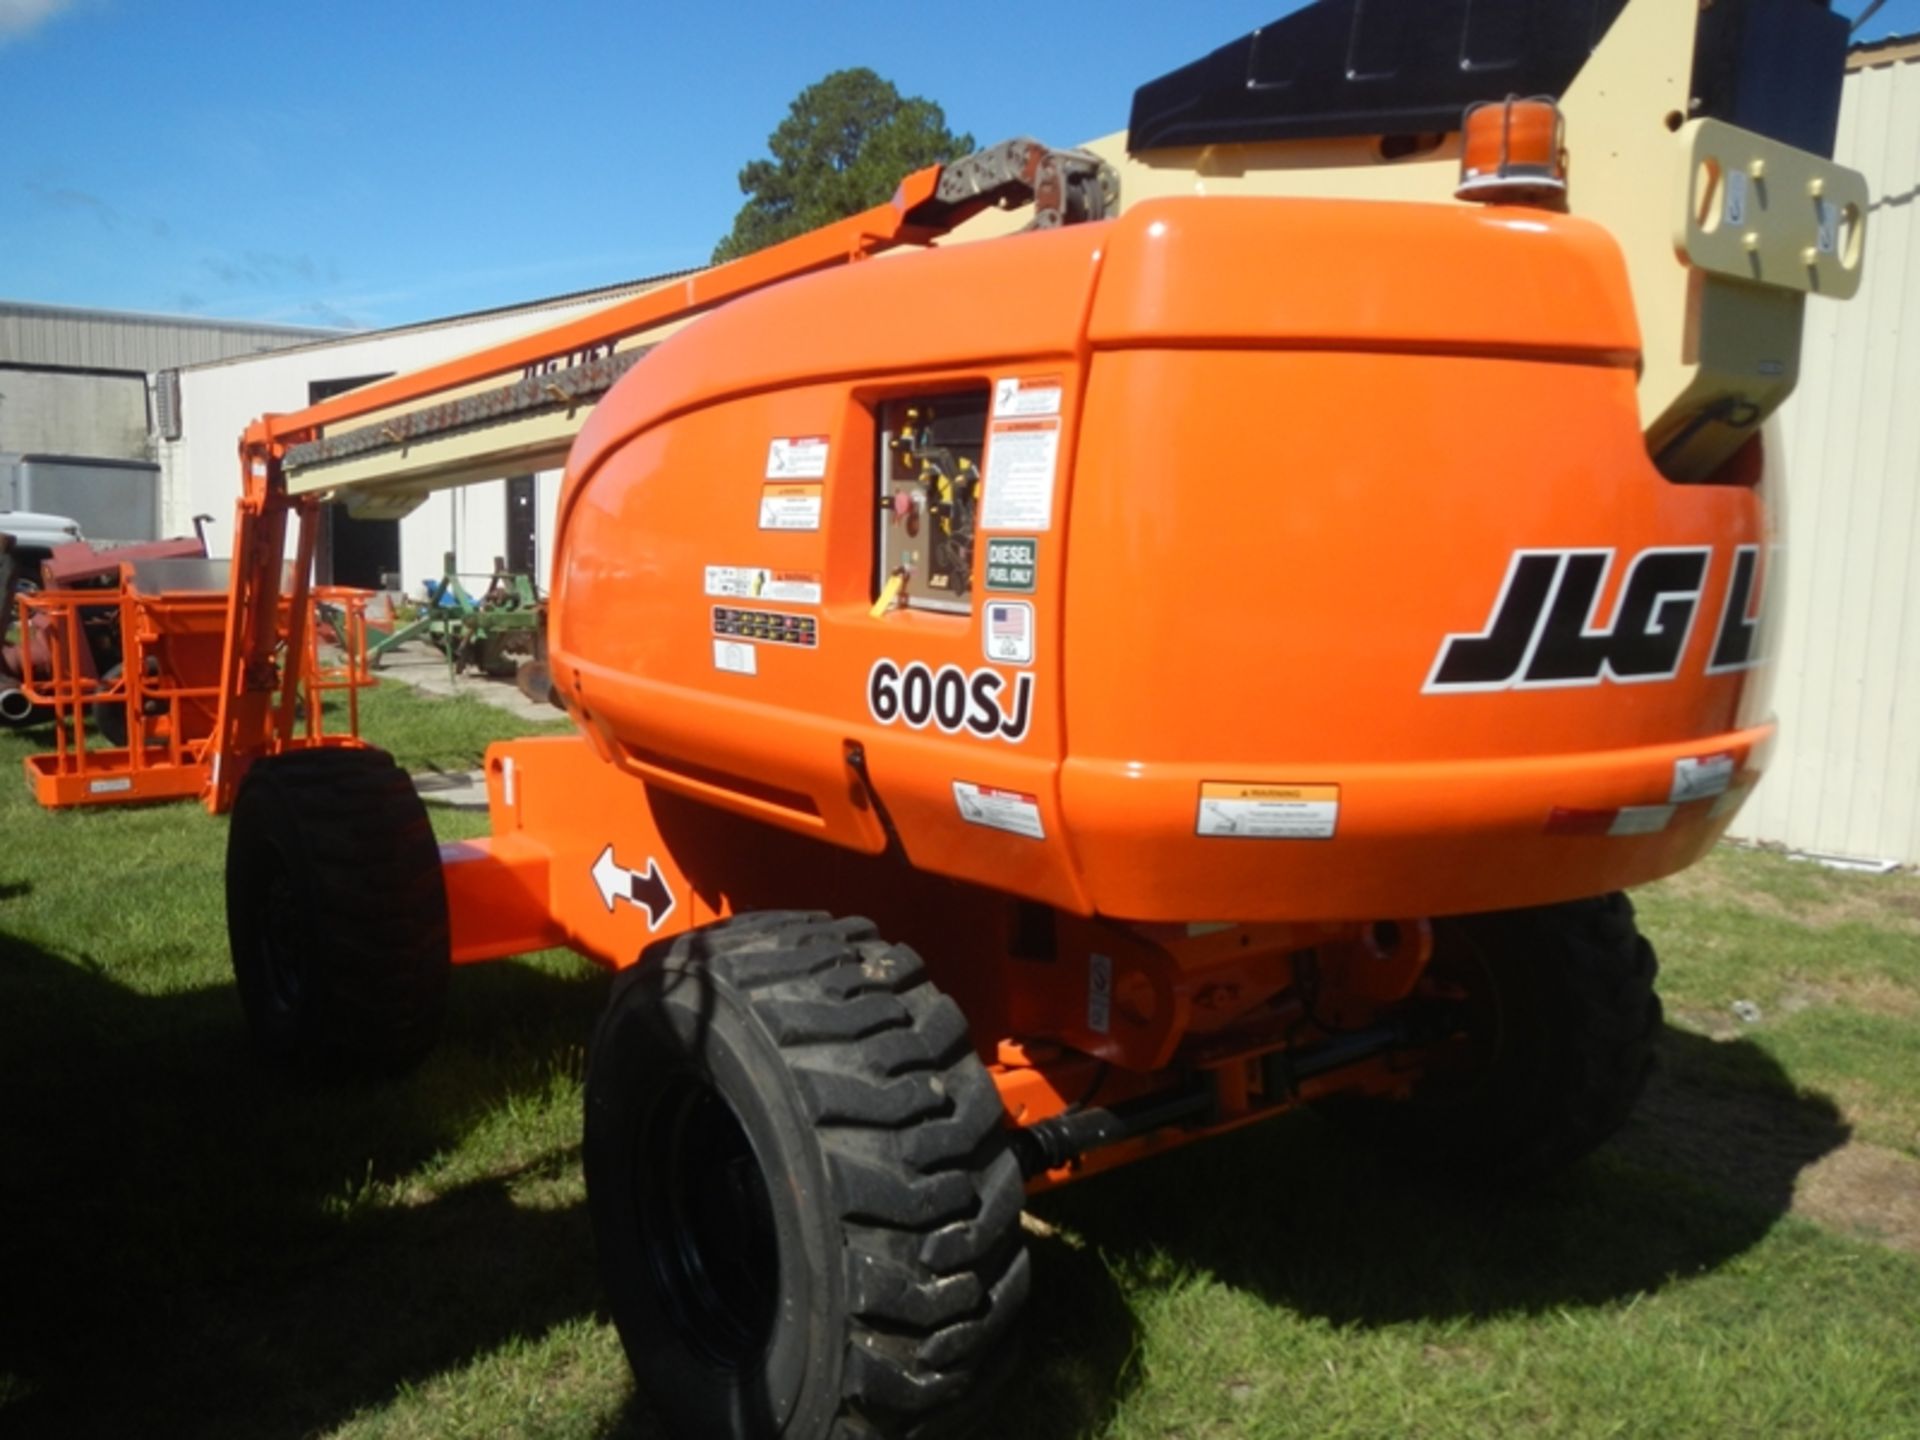 JLG 600SJ rough terrain 65' telescopic aerial lift new paint and new tires vin# 0300027119 - Image 4 of 6